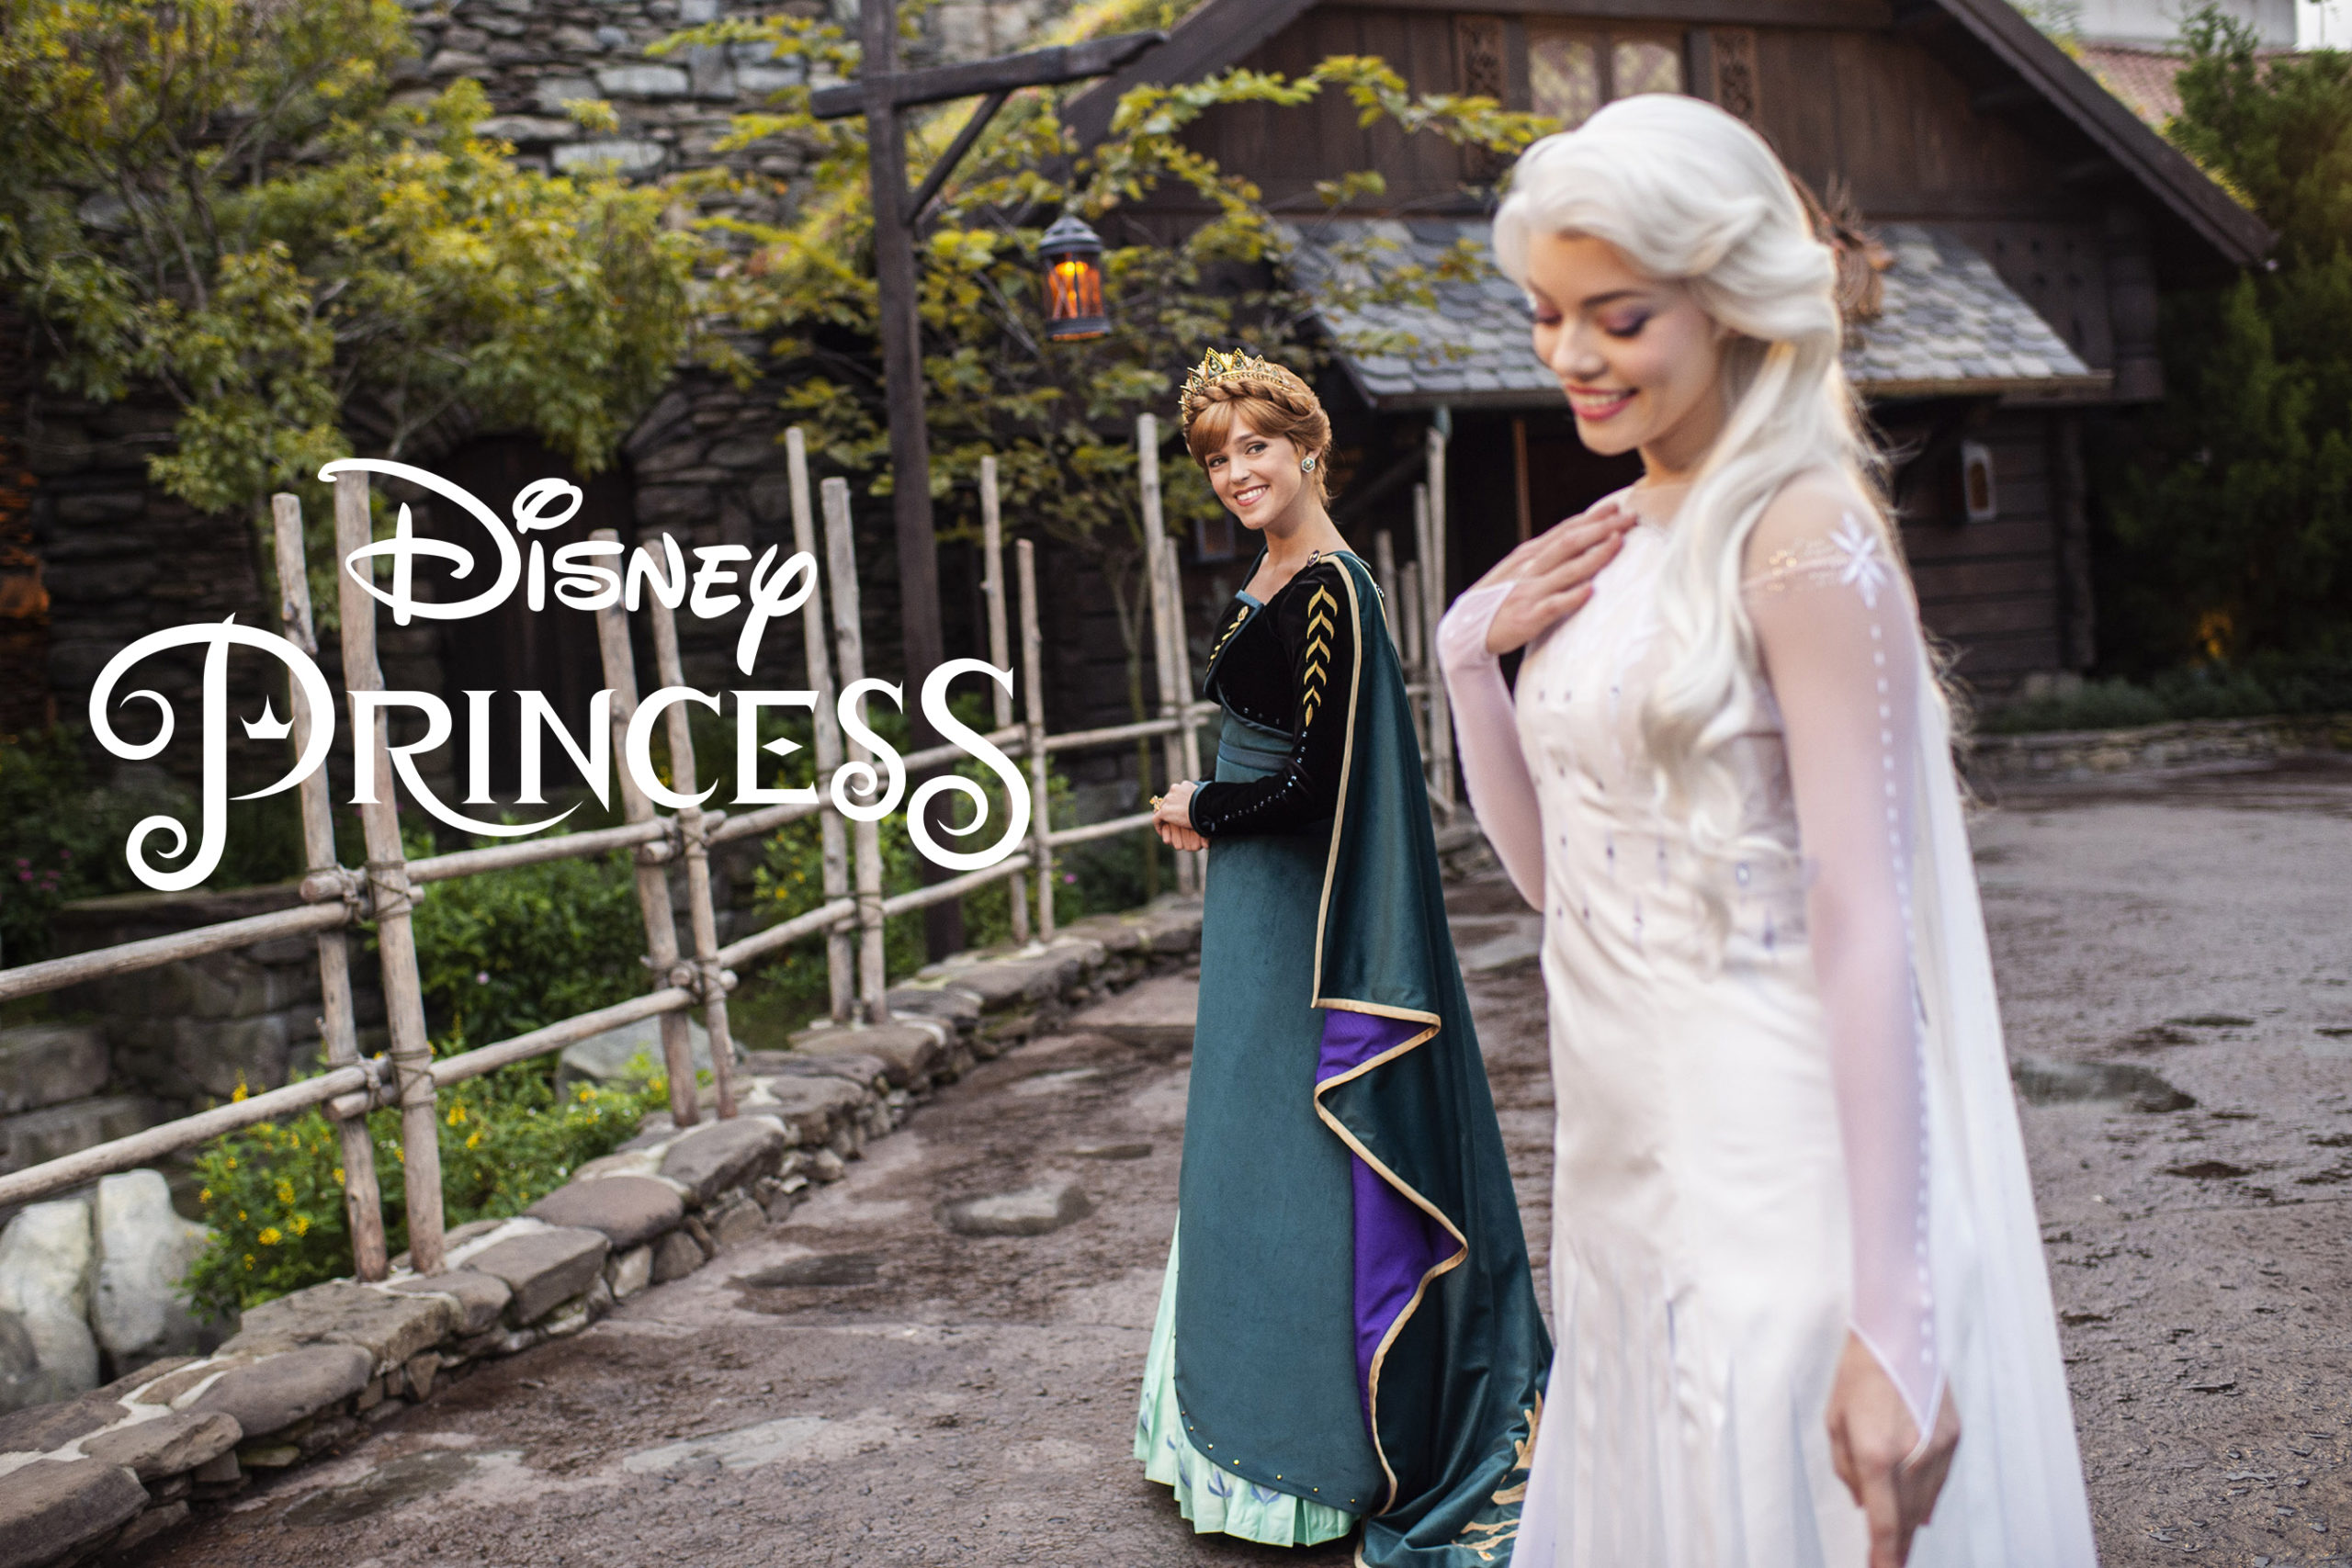 Elsa Anna To Officially Join Disney Princess Lineup In Virtual Coronation Ceremony Rotoscopers